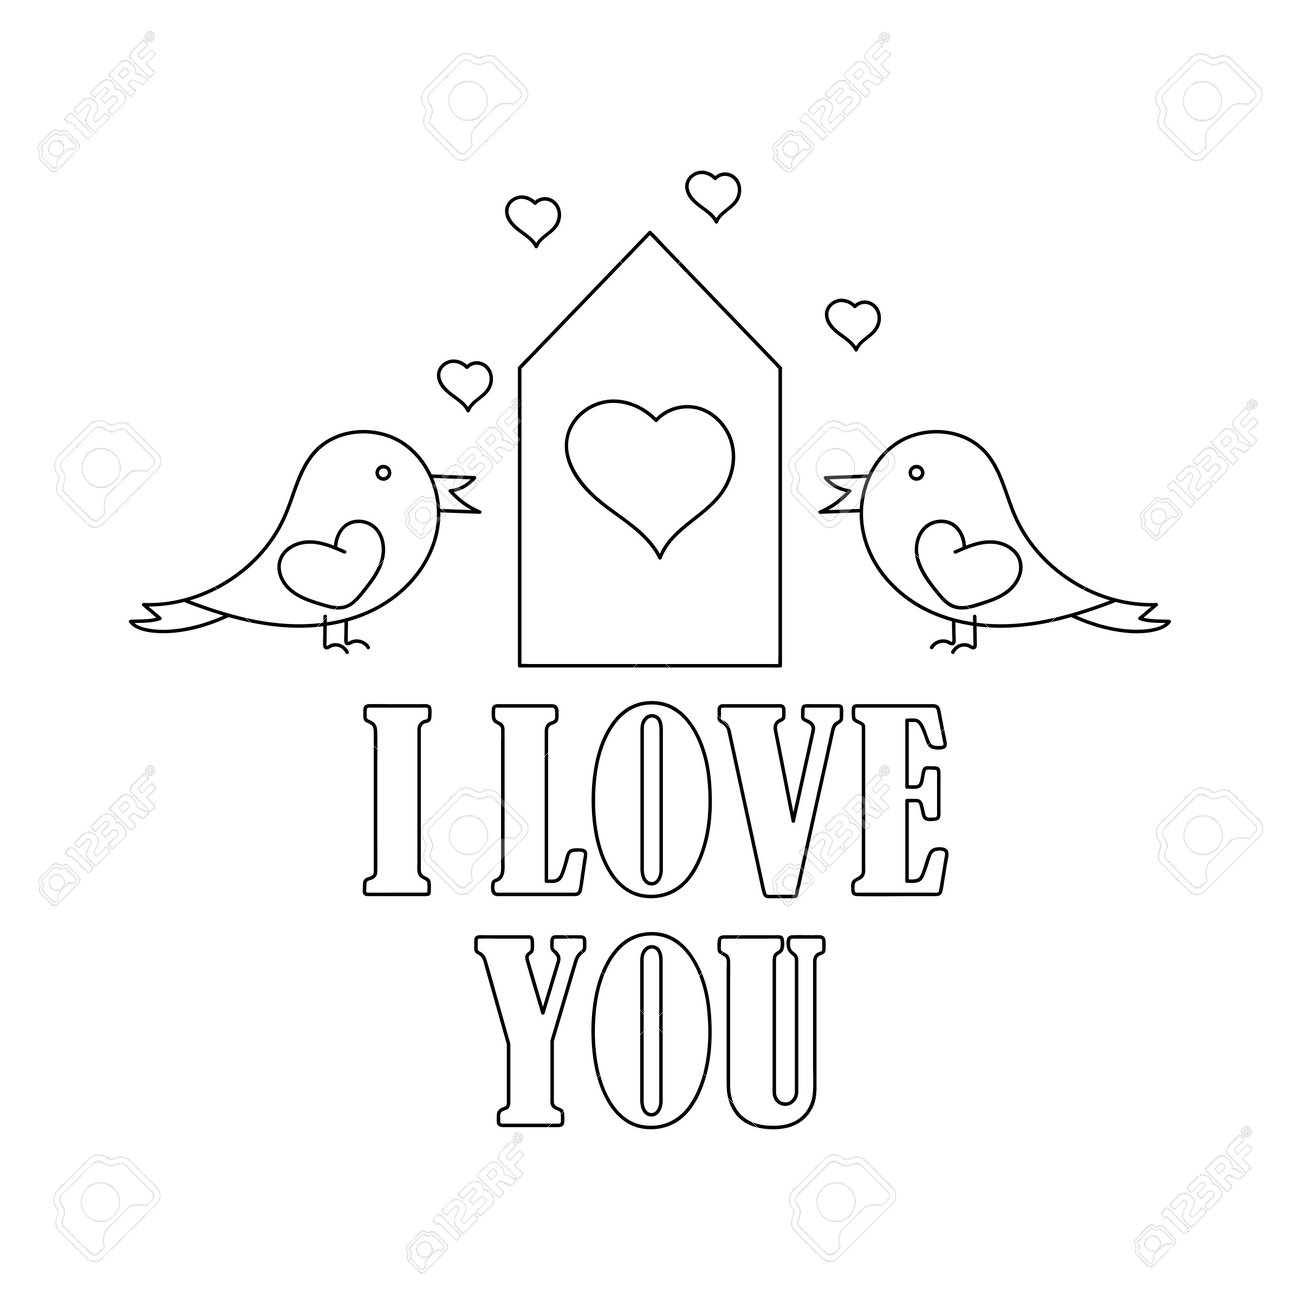 Simple coloring book valentines day greeting card design wedding the inscription i love you two small birds a birdhouse hearts feelings the concept of a love relationship royalty free svg cliparts vectors